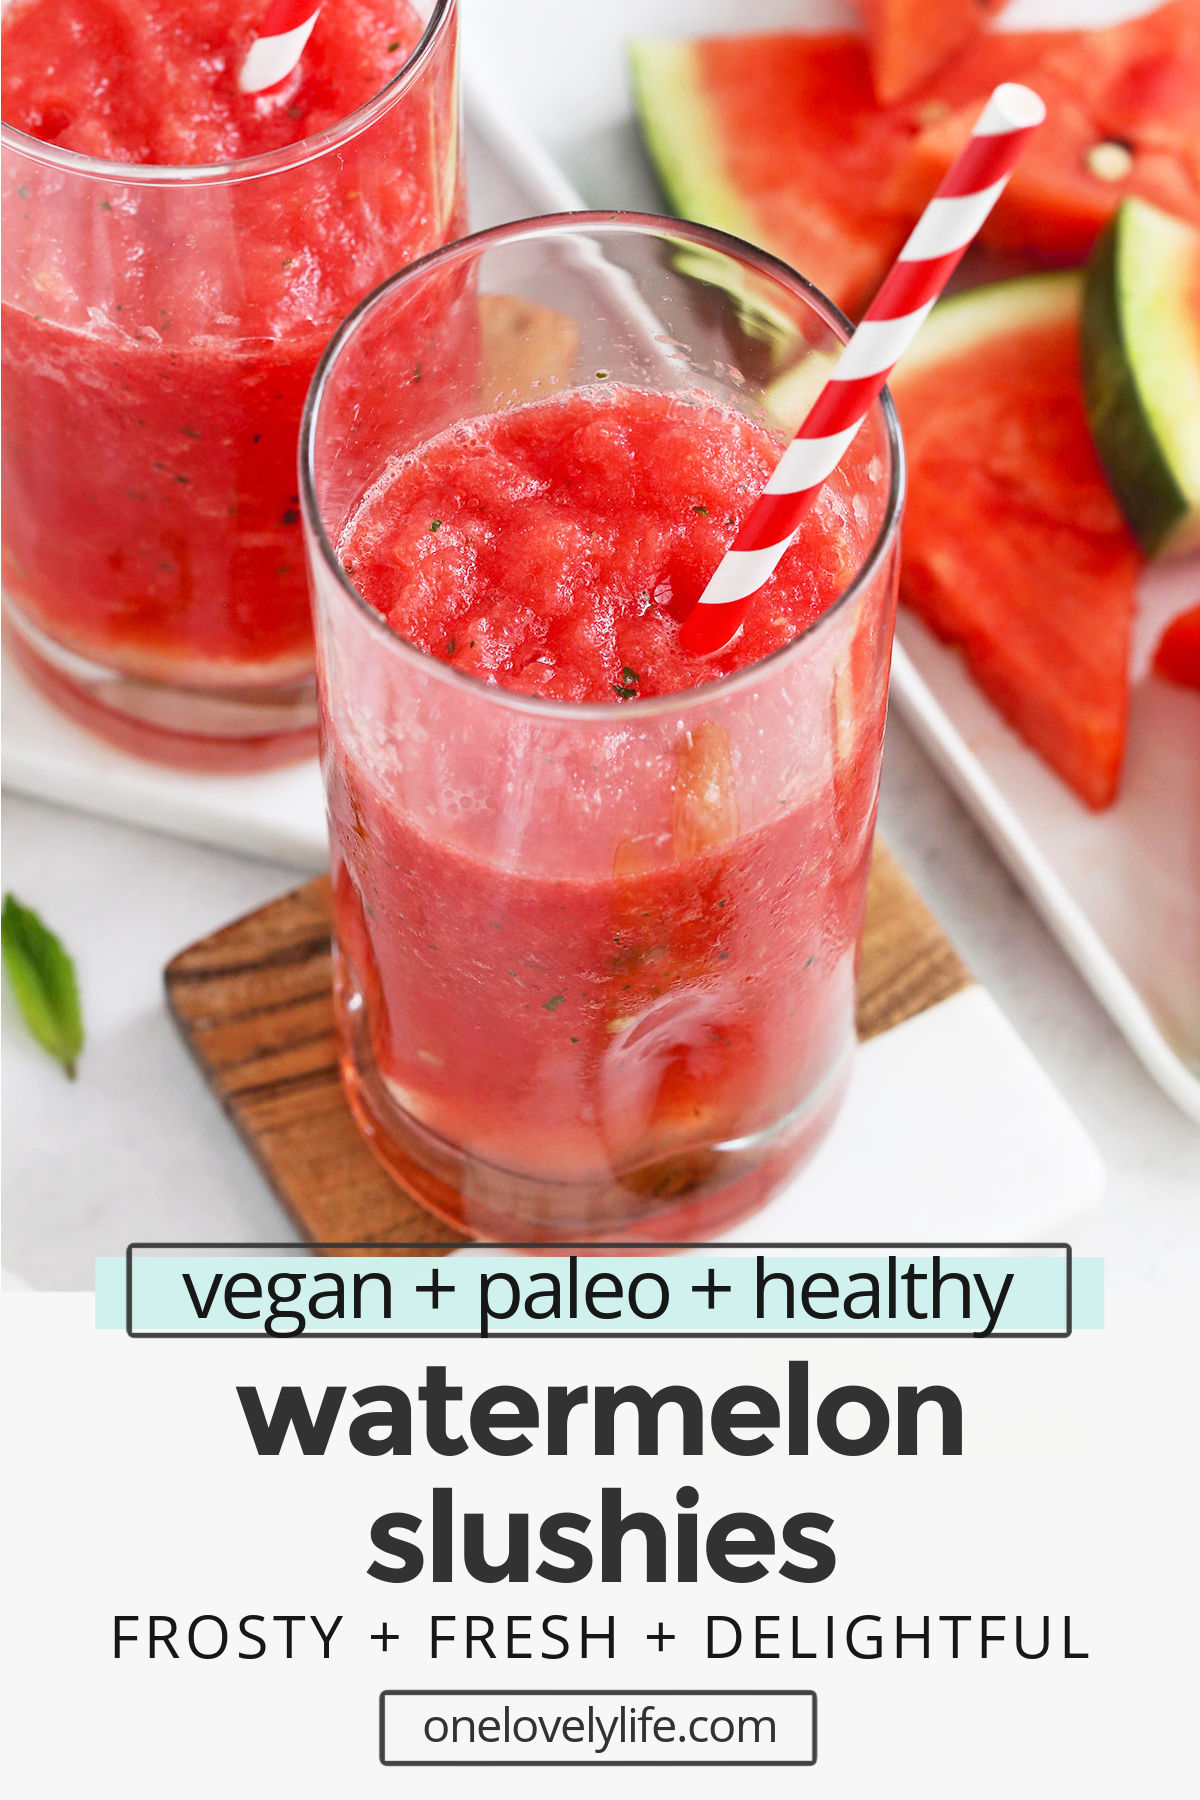 Watermelon Slushie - These frosty watermelon slushies are made from whole-food ingredients and taste AMAZING. So refreshing on a hot day! (Paleo, Vegan) // Watermelon slushy // watermelon icee // watermelon frosty // watermelon drink // watermelon cooler